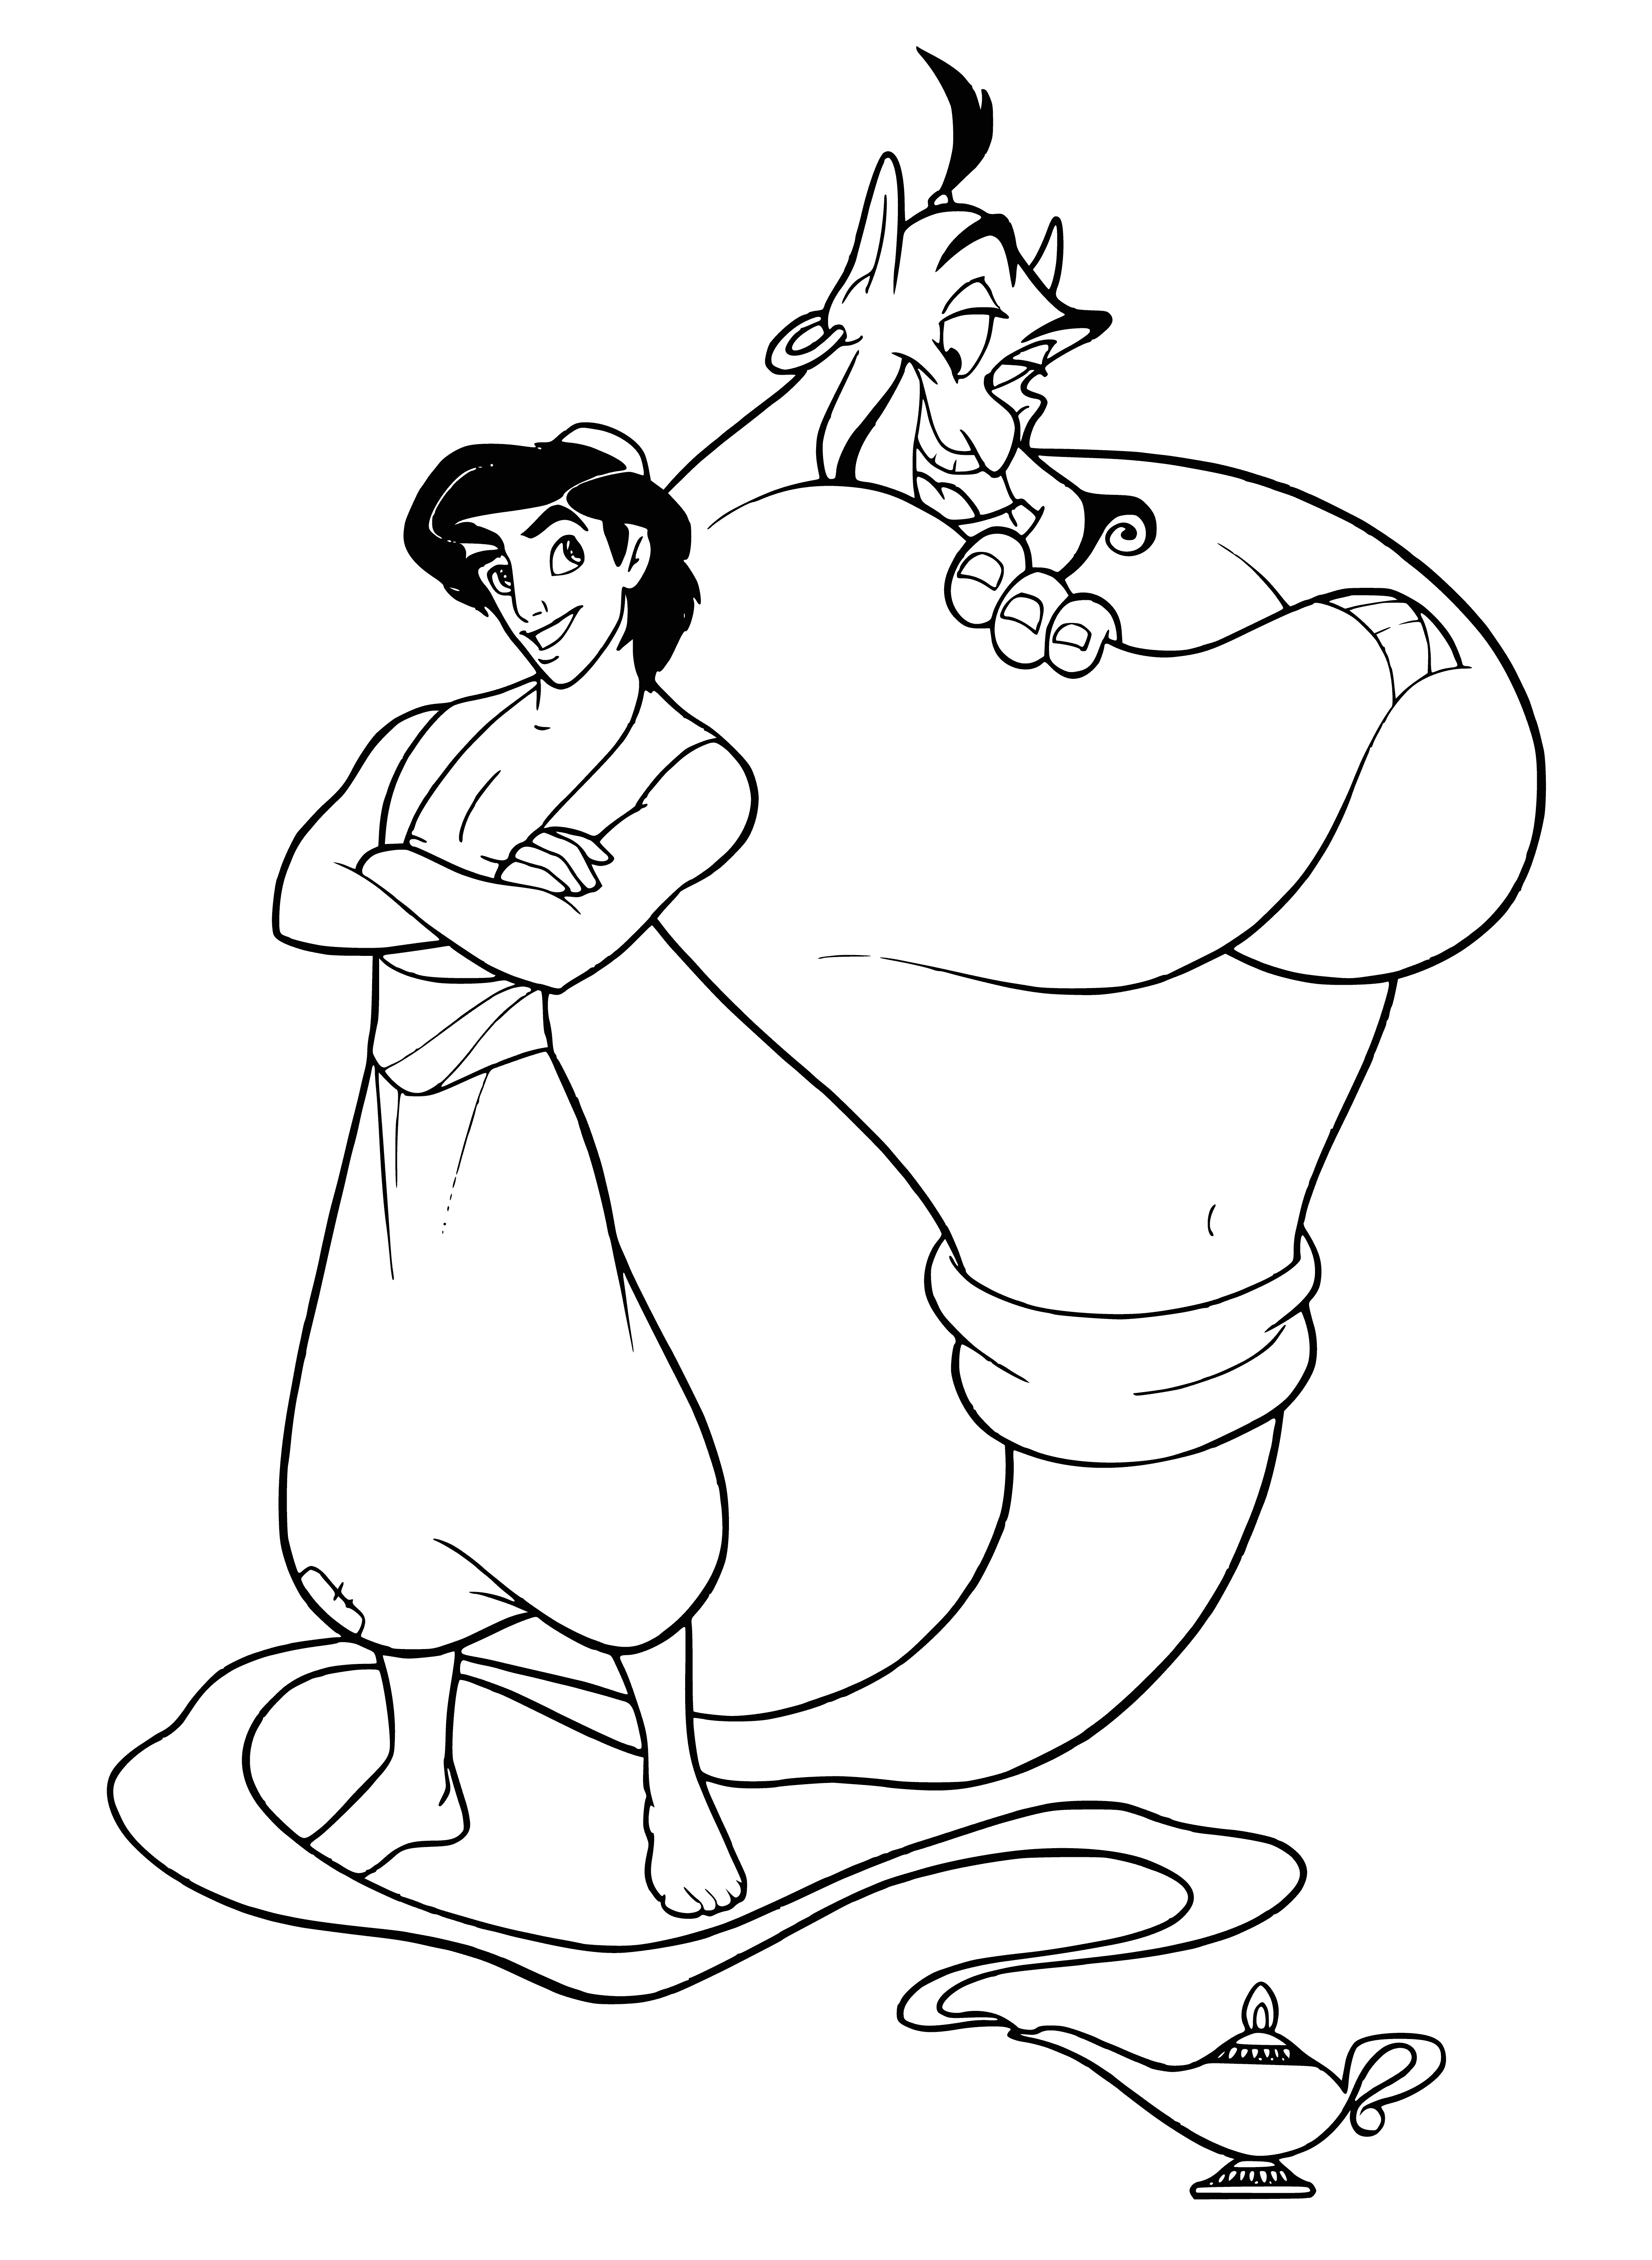 Aladdin and Ginny coloring page